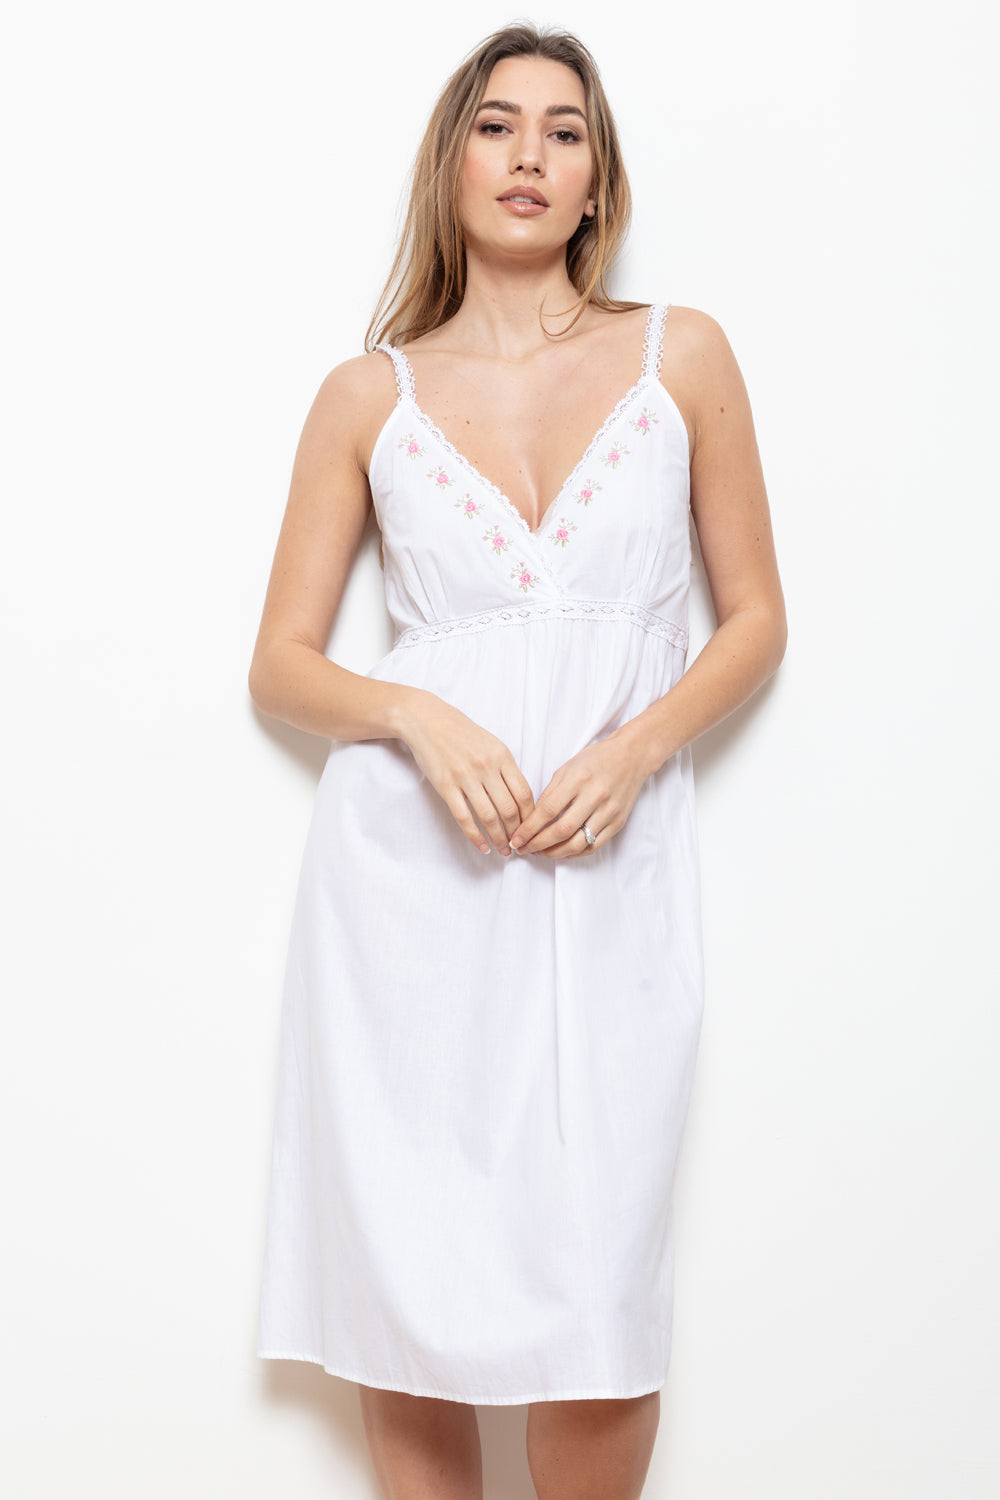 Cottonreal 'Hope' Cotton Lawn Strappy Nightdress